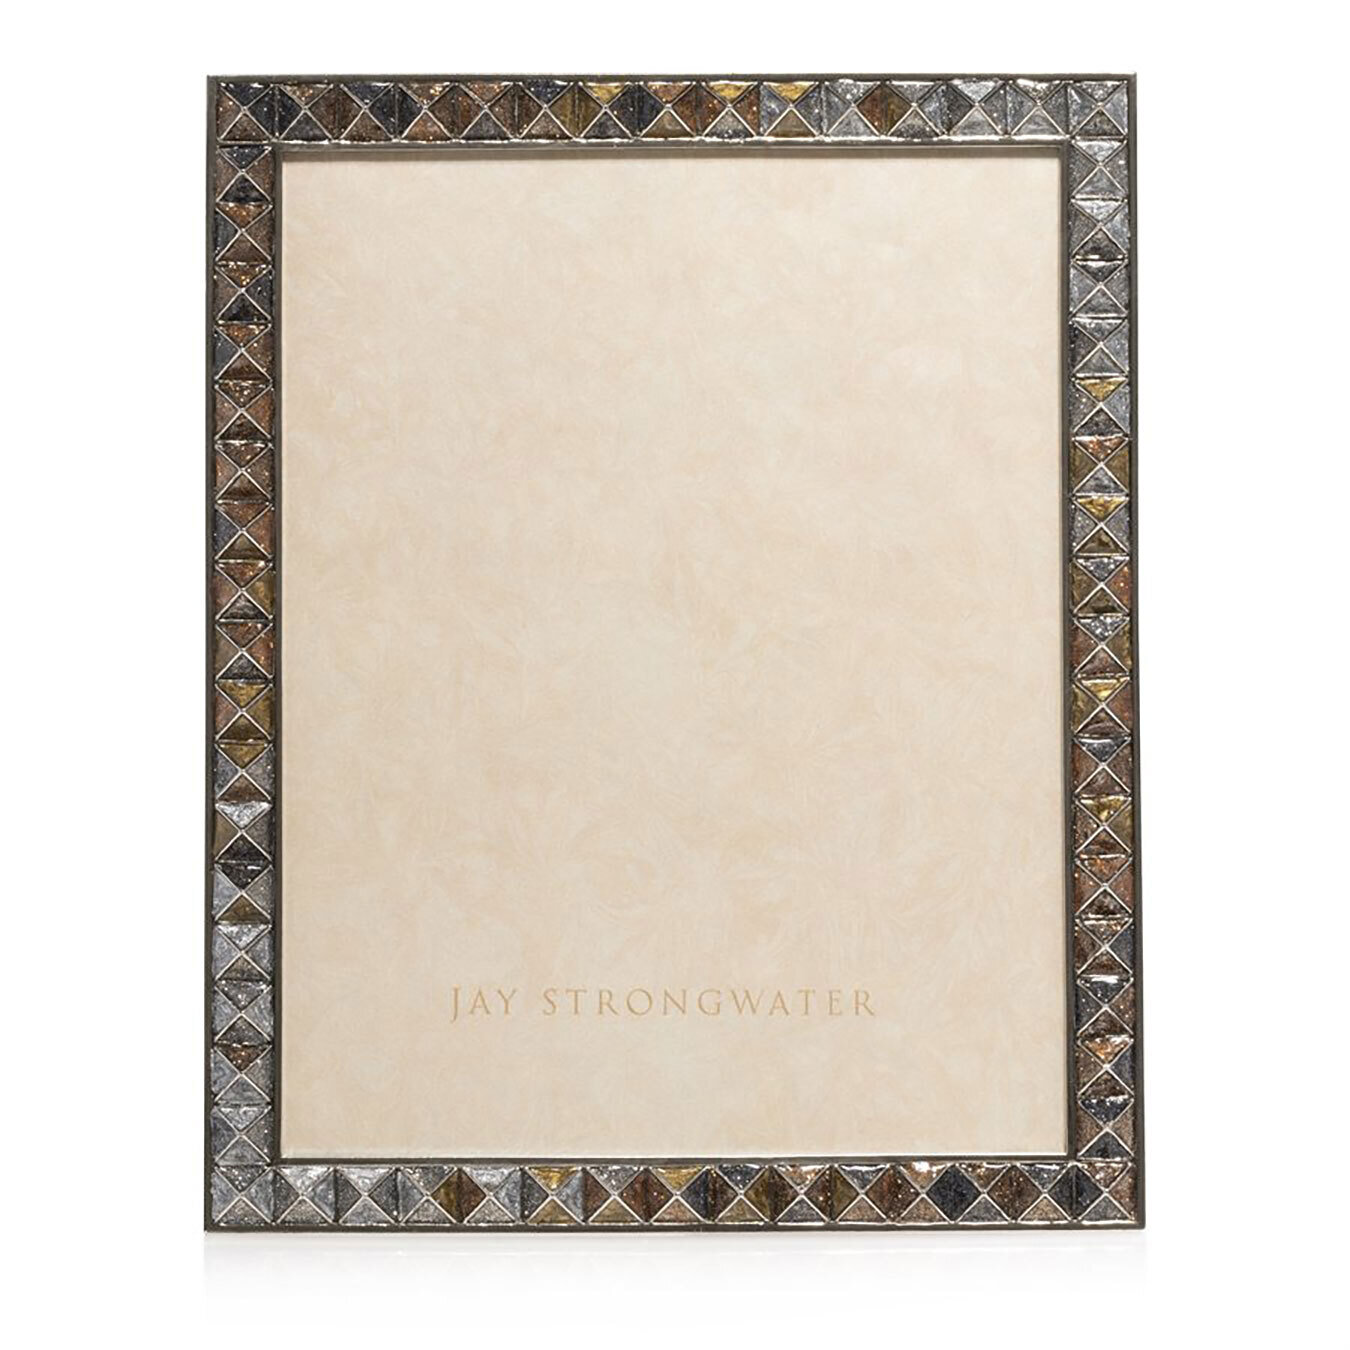 Jay Strongwater Pyramid 8 X 10 Inch Picture Frame SPF5878-634